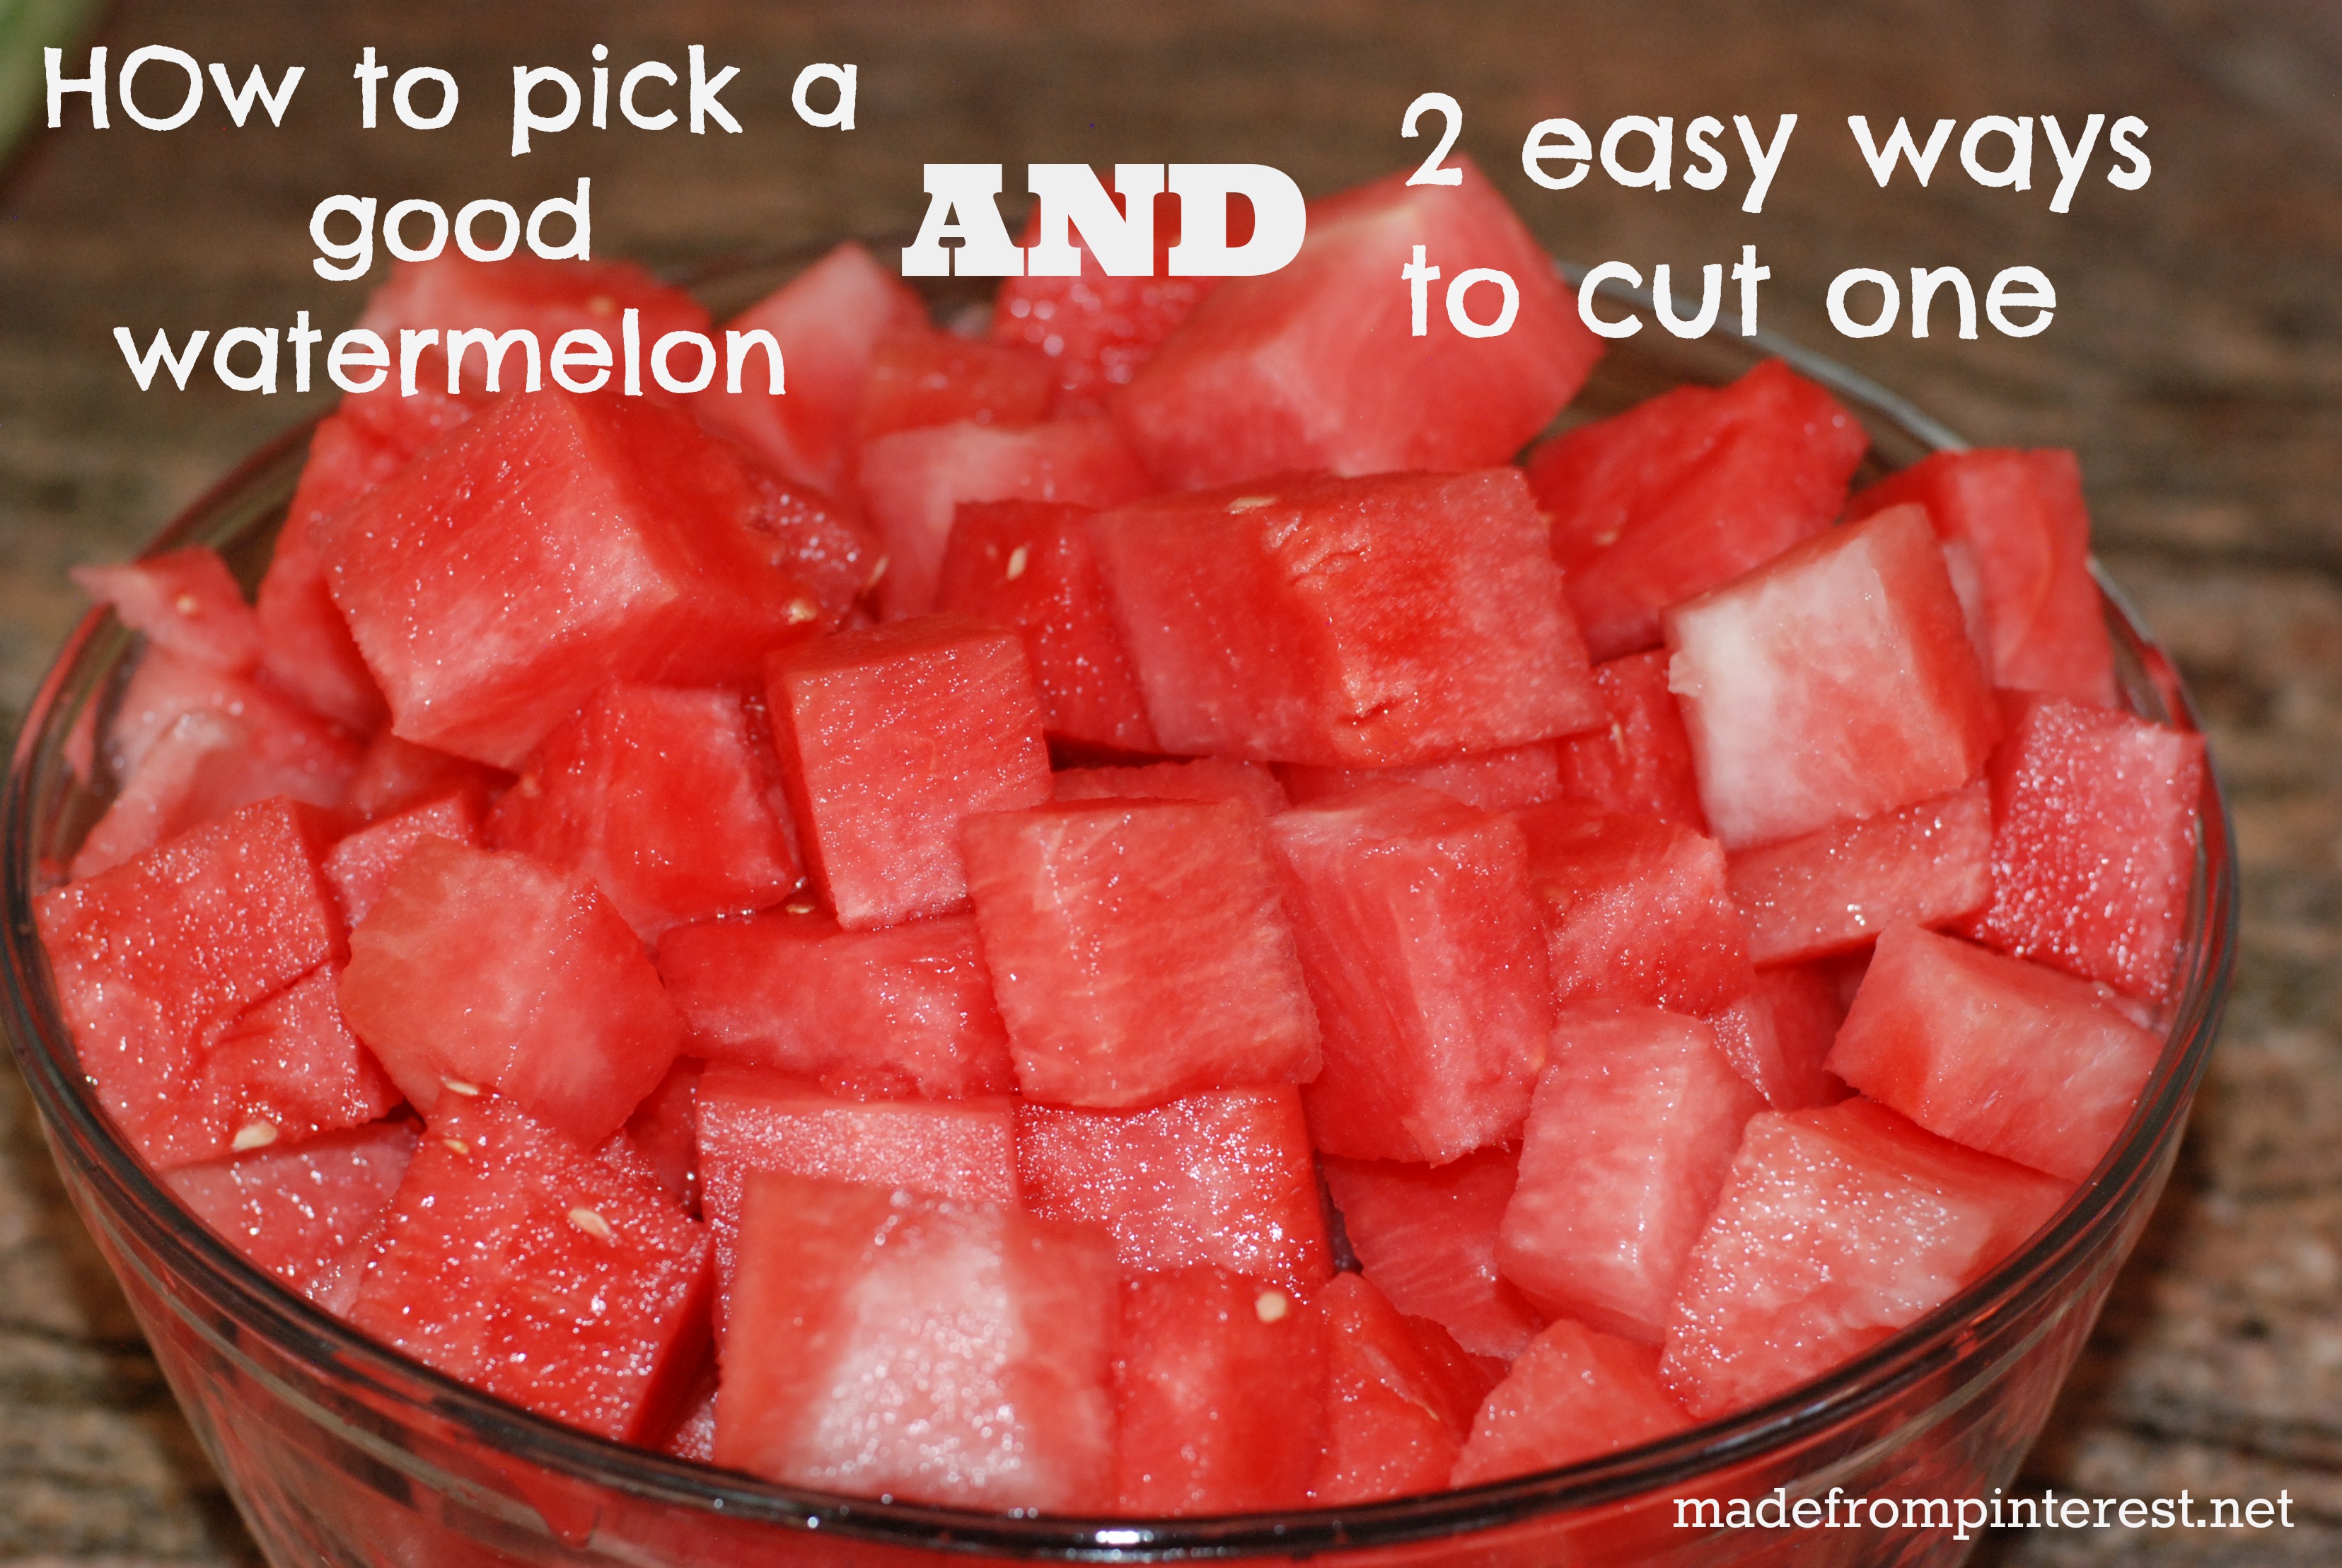 How to Pick a Good Watermelon AND 2 easy ways to cut one!